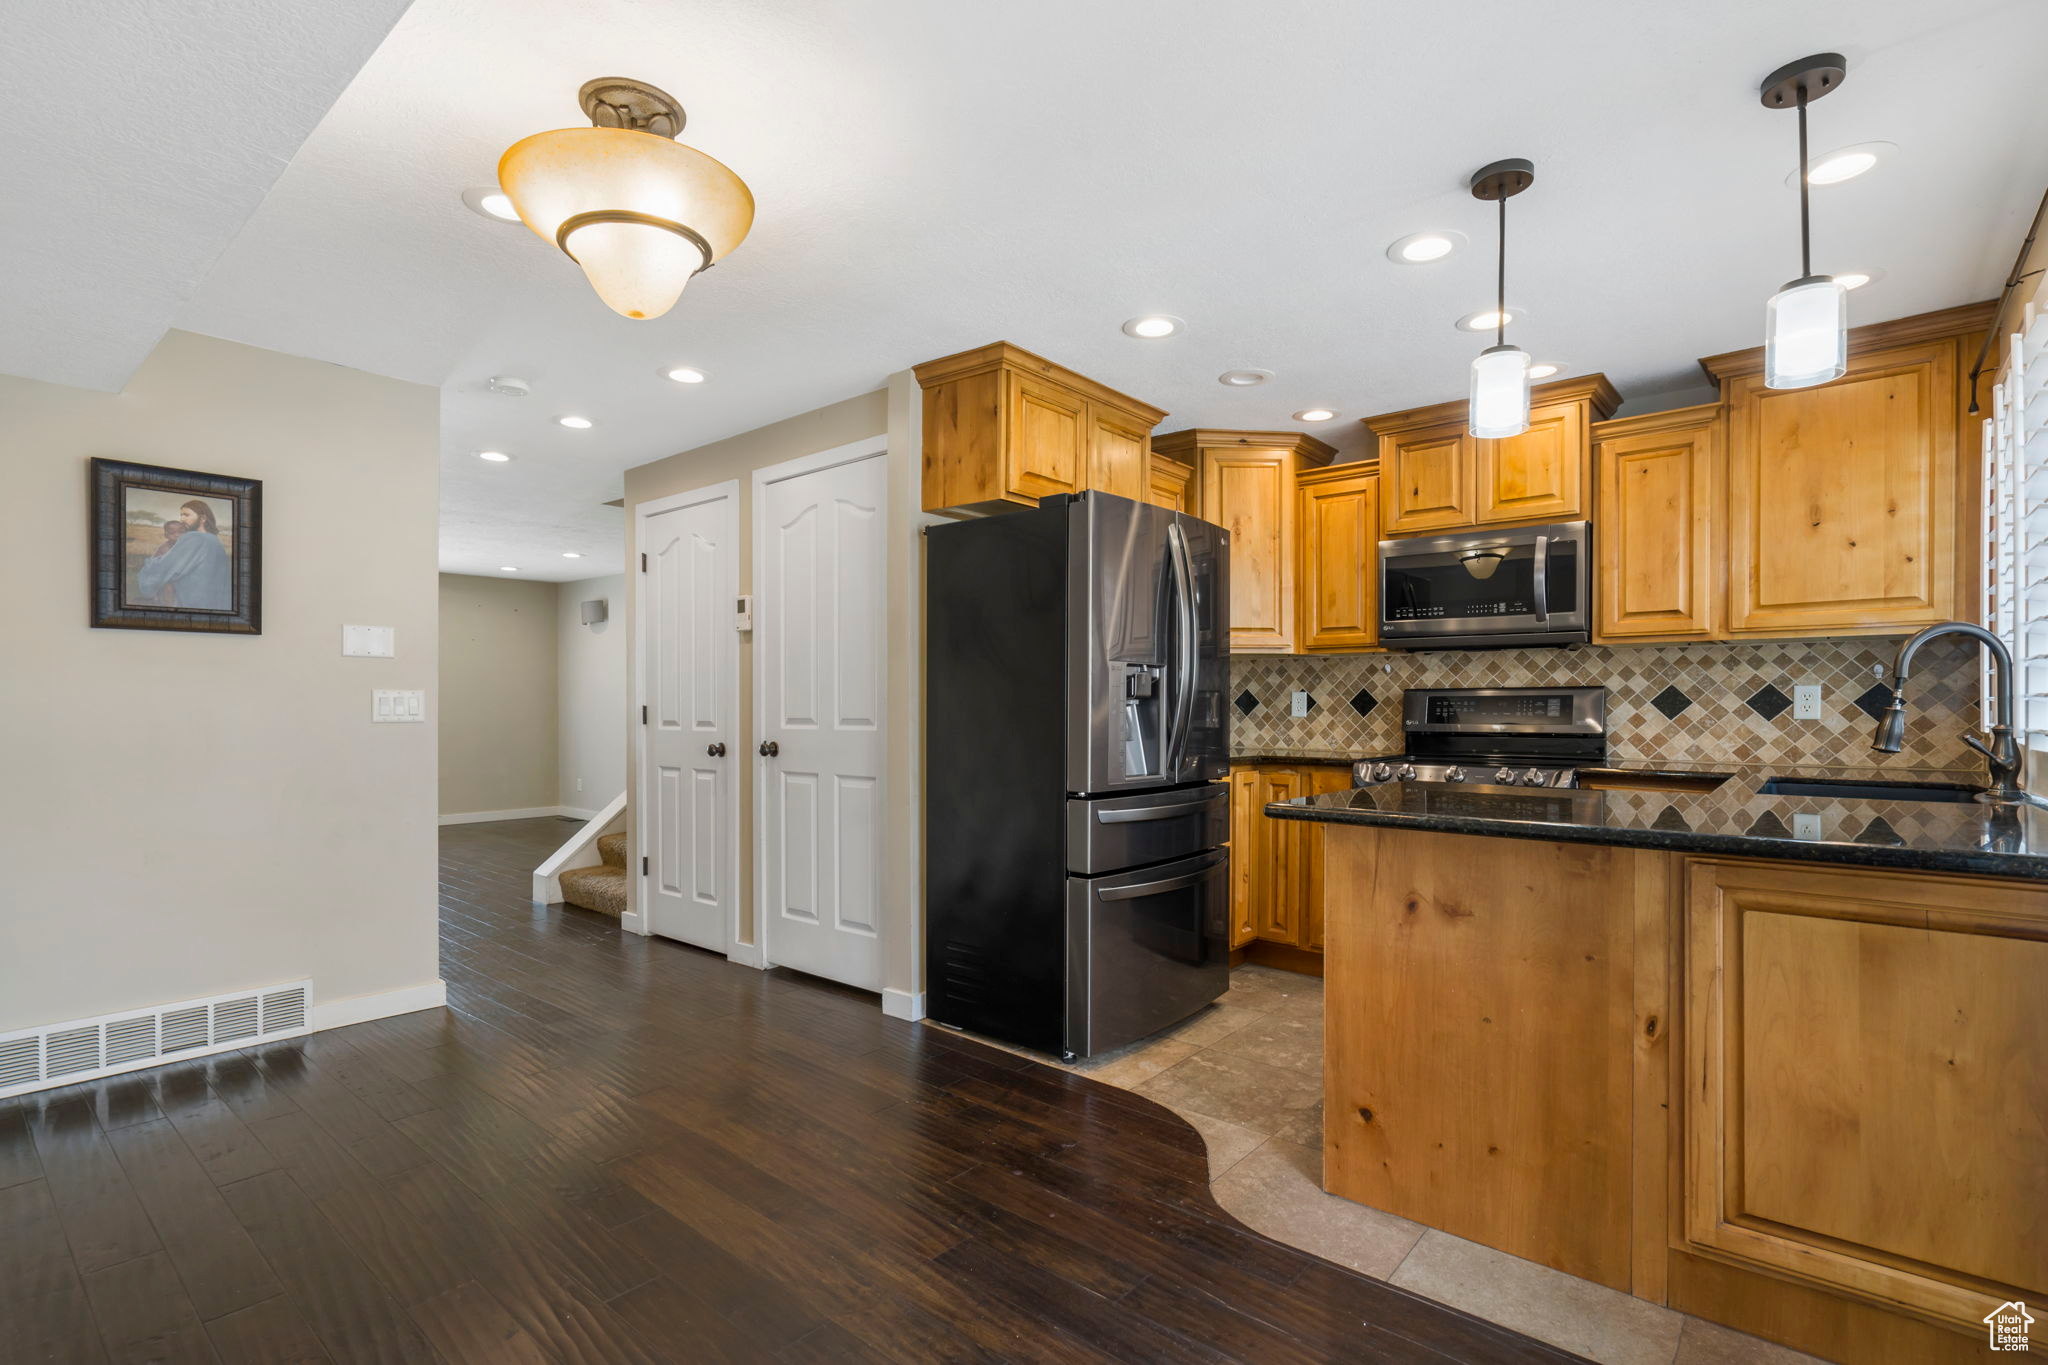 Kitchen with wood-type flooring, decorative light fixtures, backsplash, stainless steel appliances, and sink